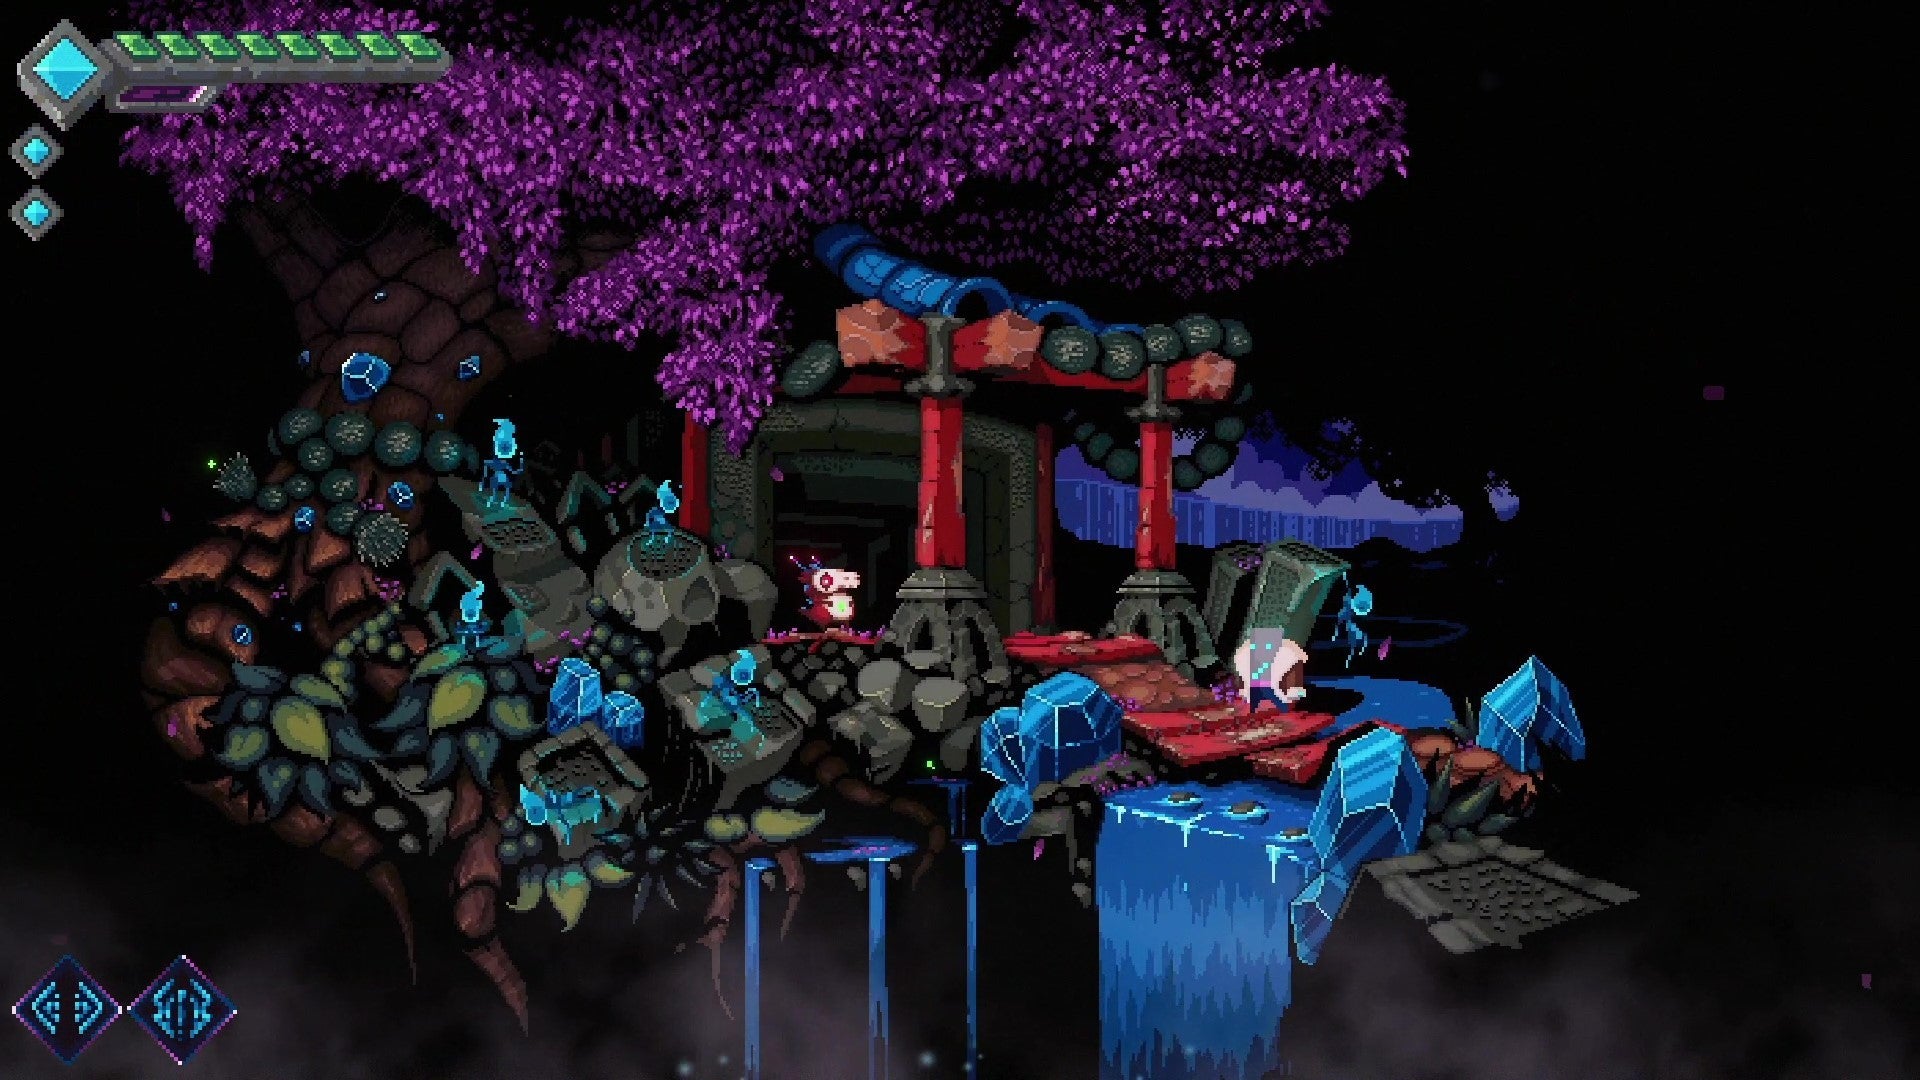 A warrior in a fur coat stands on a bridge by a Japanese-style torii gate in a forest scene in Lucid.